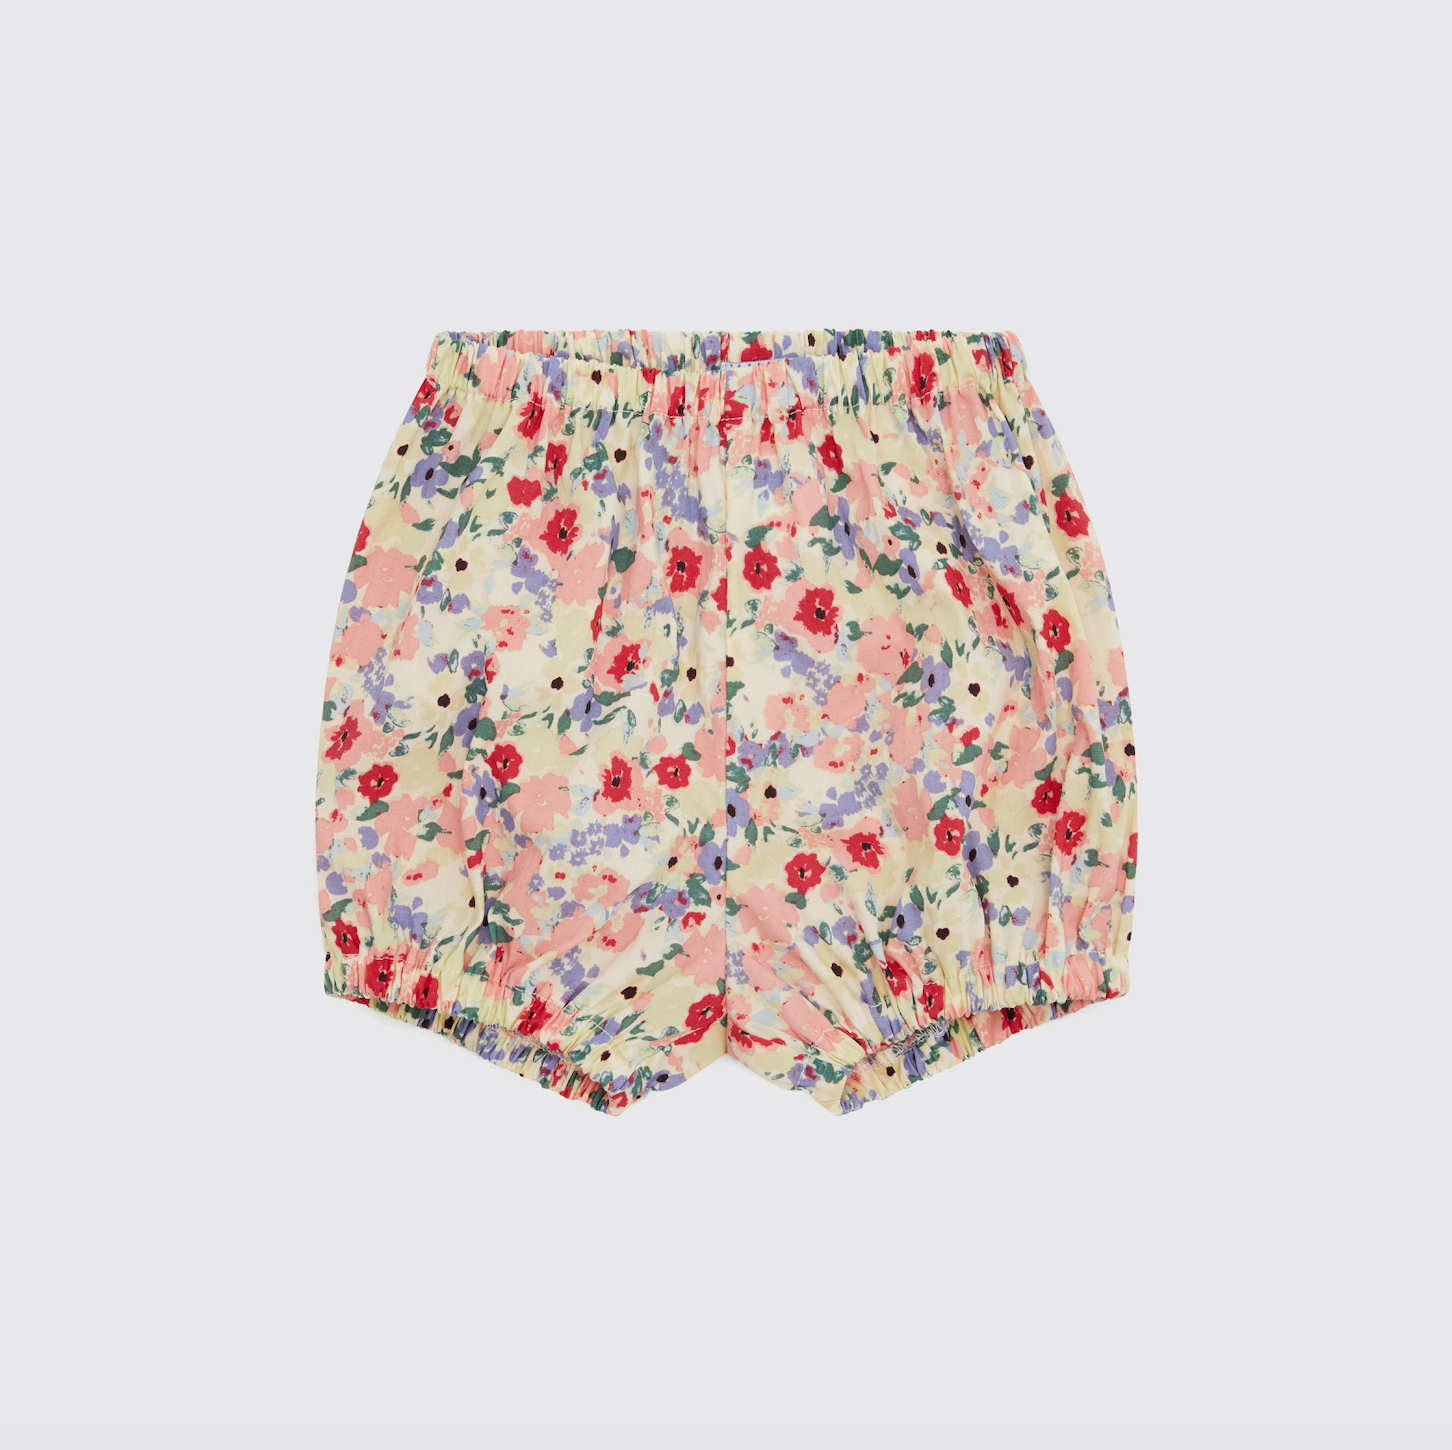 Floral baby bloomers 